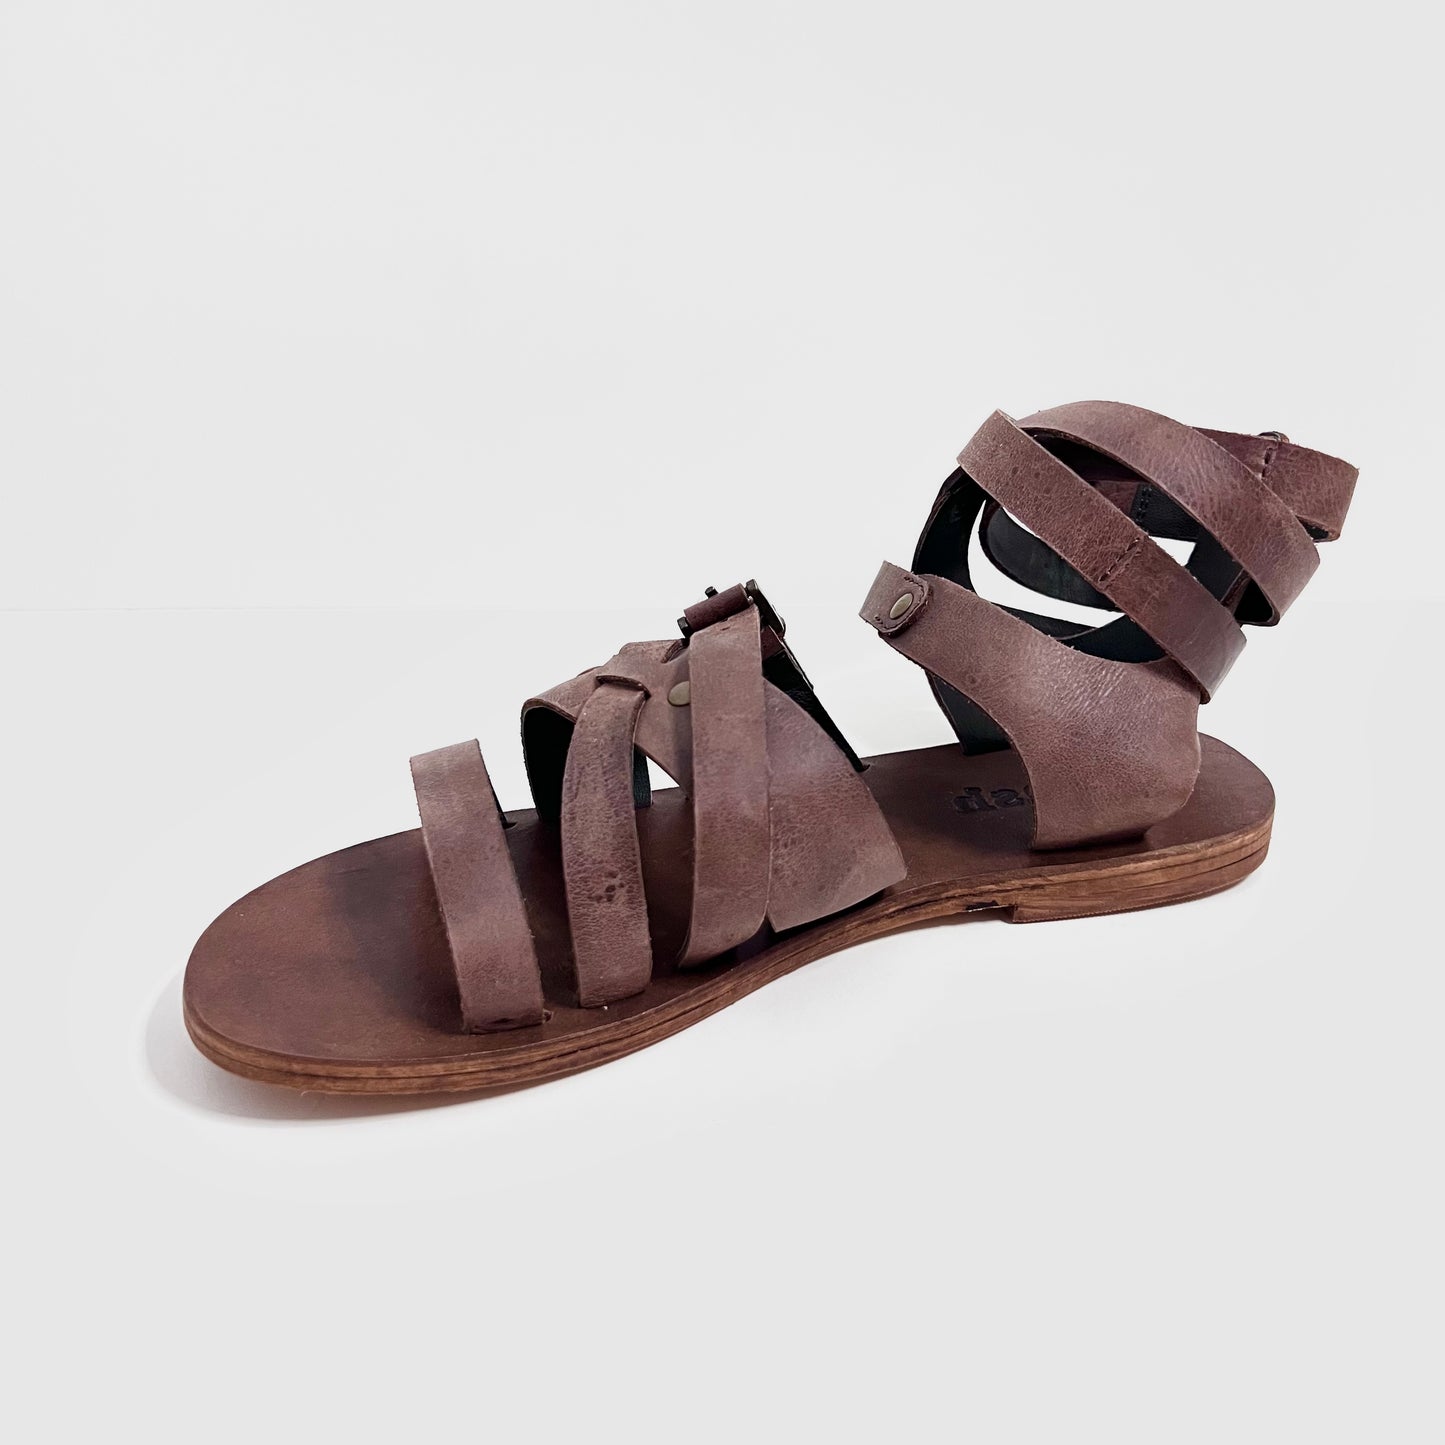 oobash Ariel gladitor leather sandal in brown color for ladies girl women